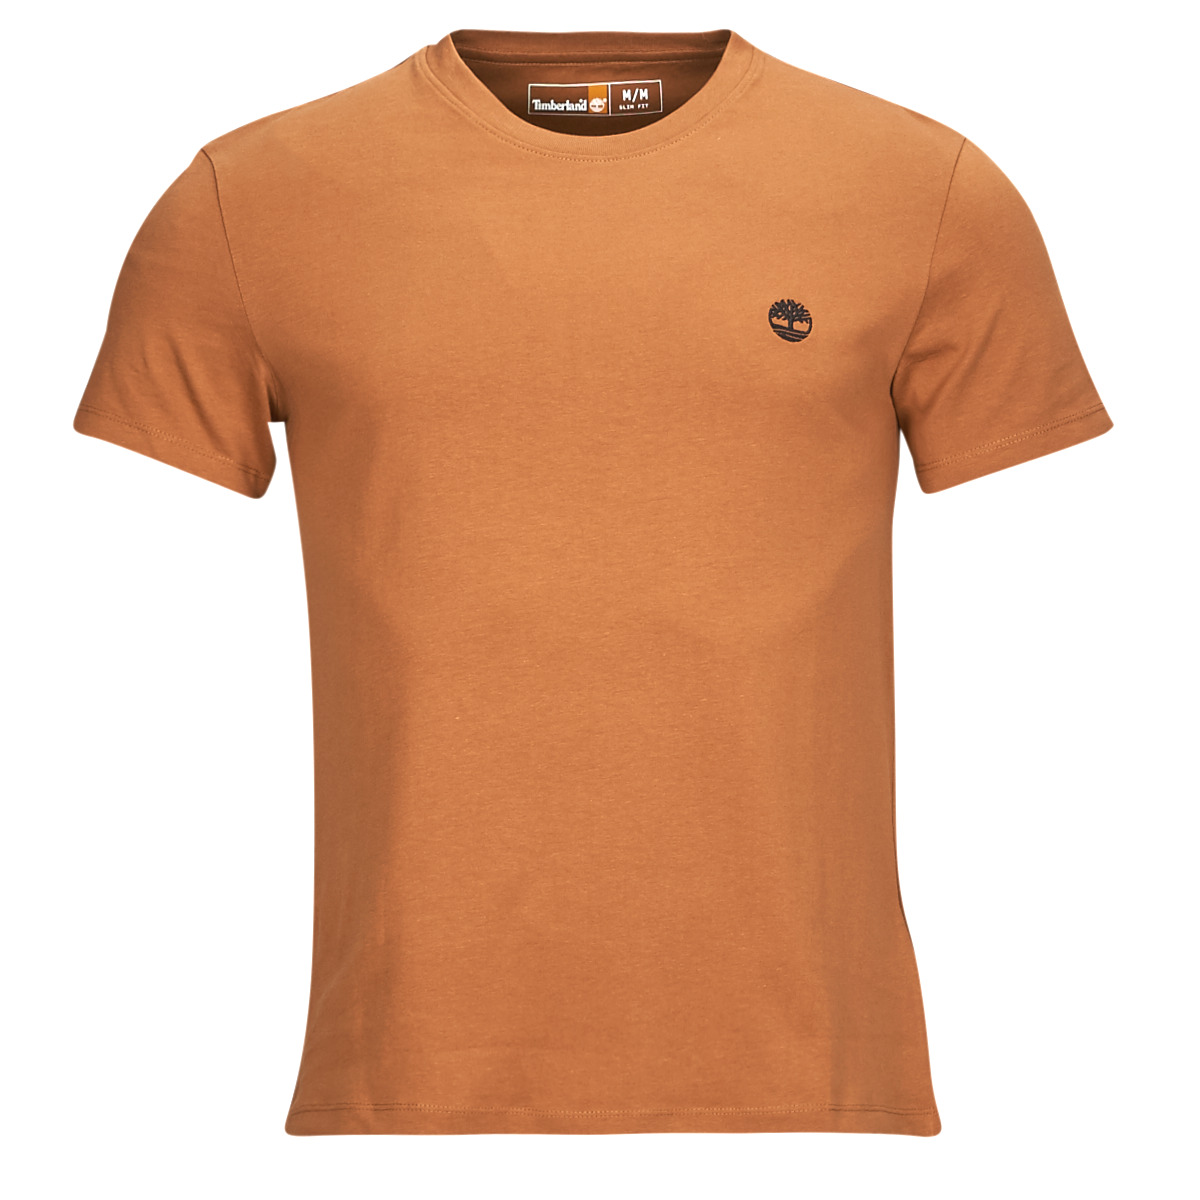 Vêtements Homme T-shirts manches courtes Timberland Dunstan River Jersey Crew Tee Slim 